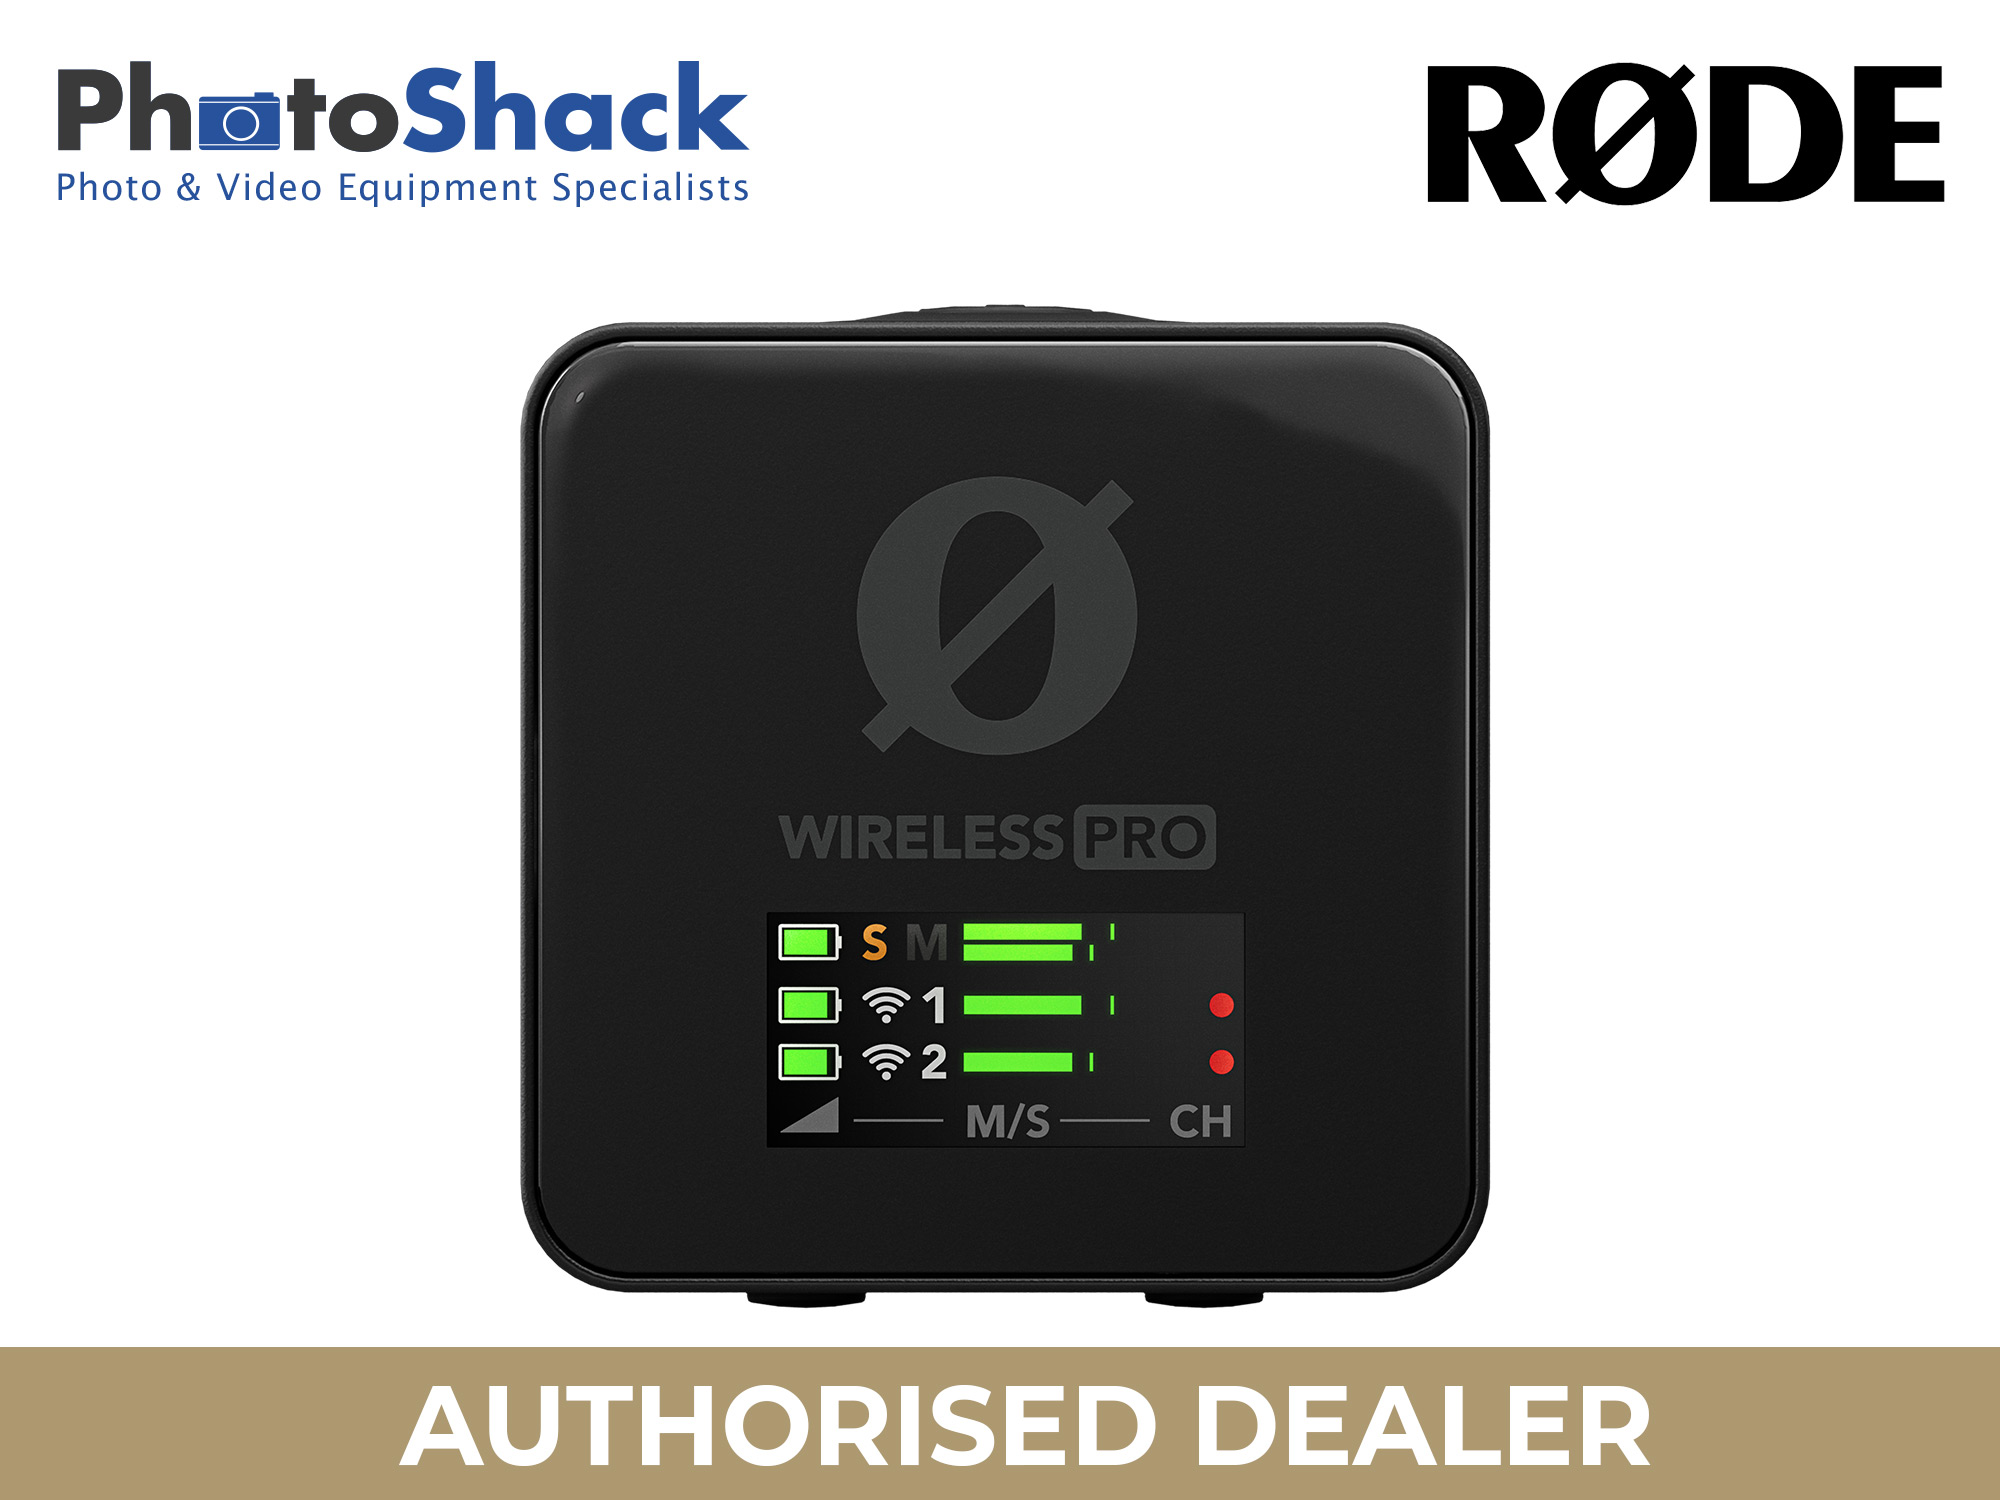 RODE Wireless Pro Compact Wireless Microphone System